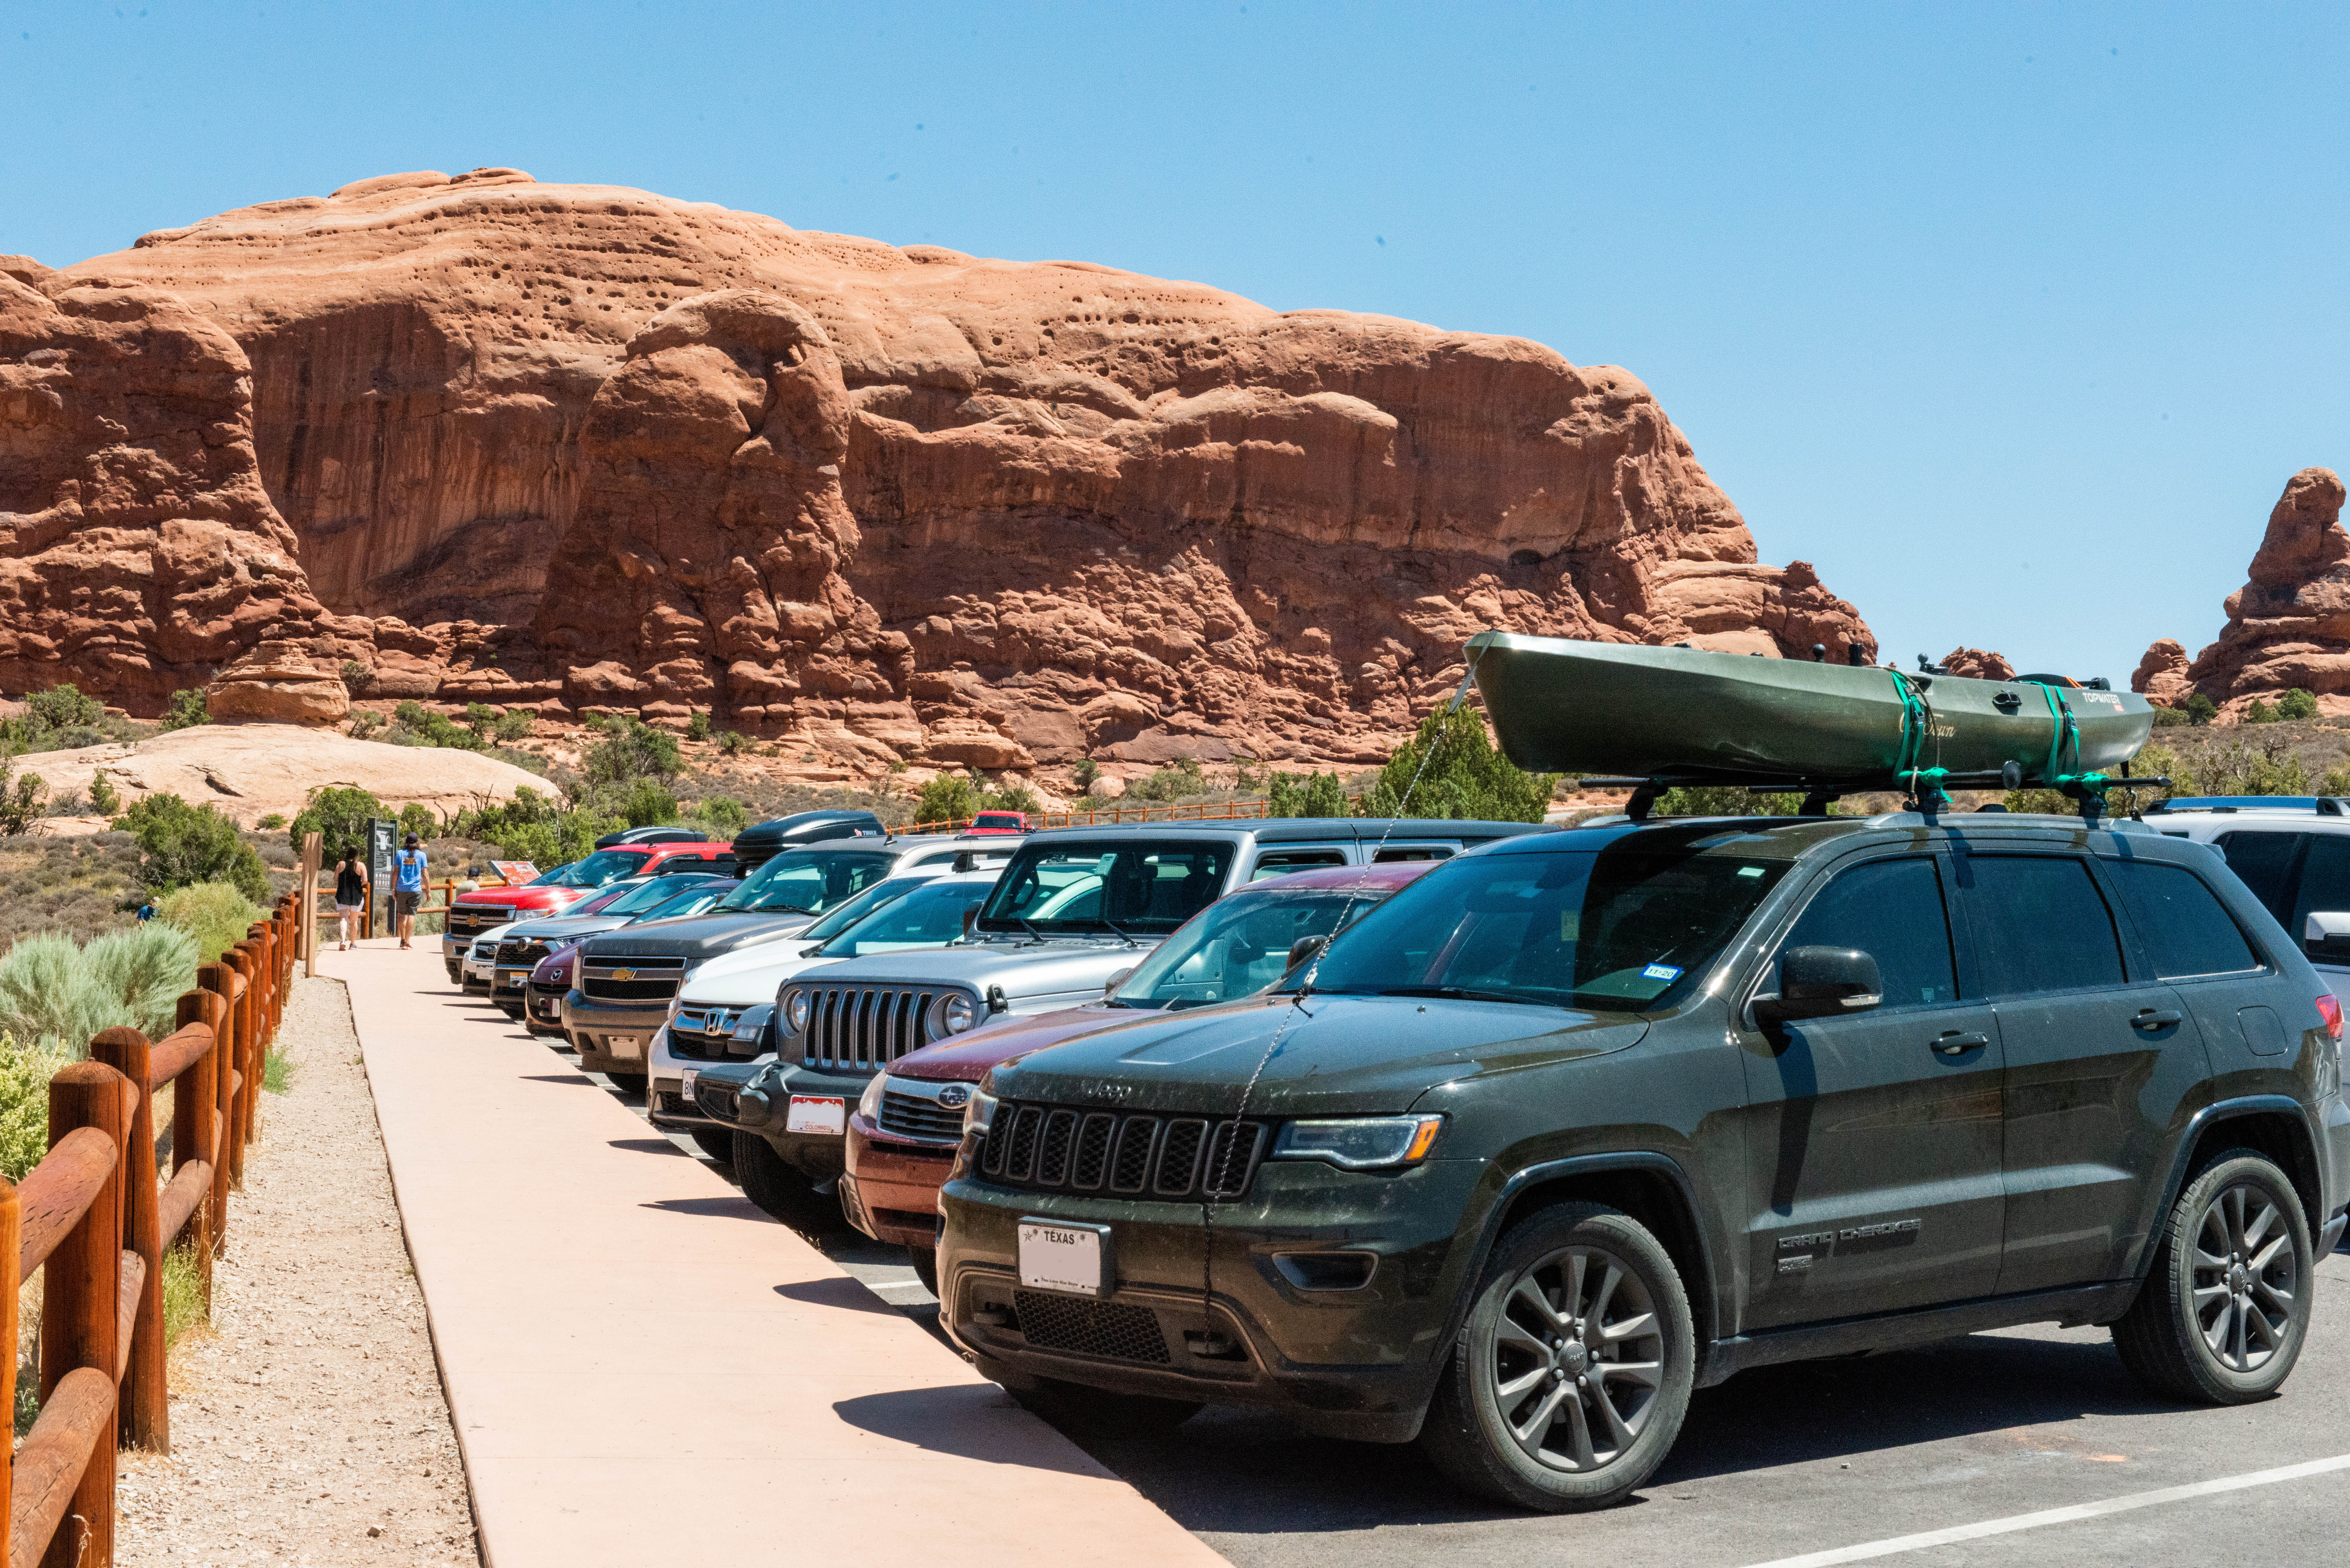 Cars fill a parking lot in Arches National Park